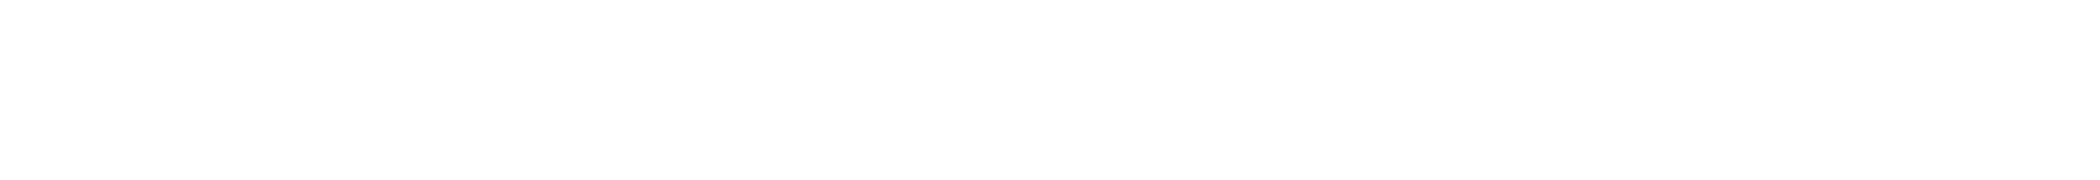 logos of brendon properties, capital group properties, advisors living, and equal housing opportunity